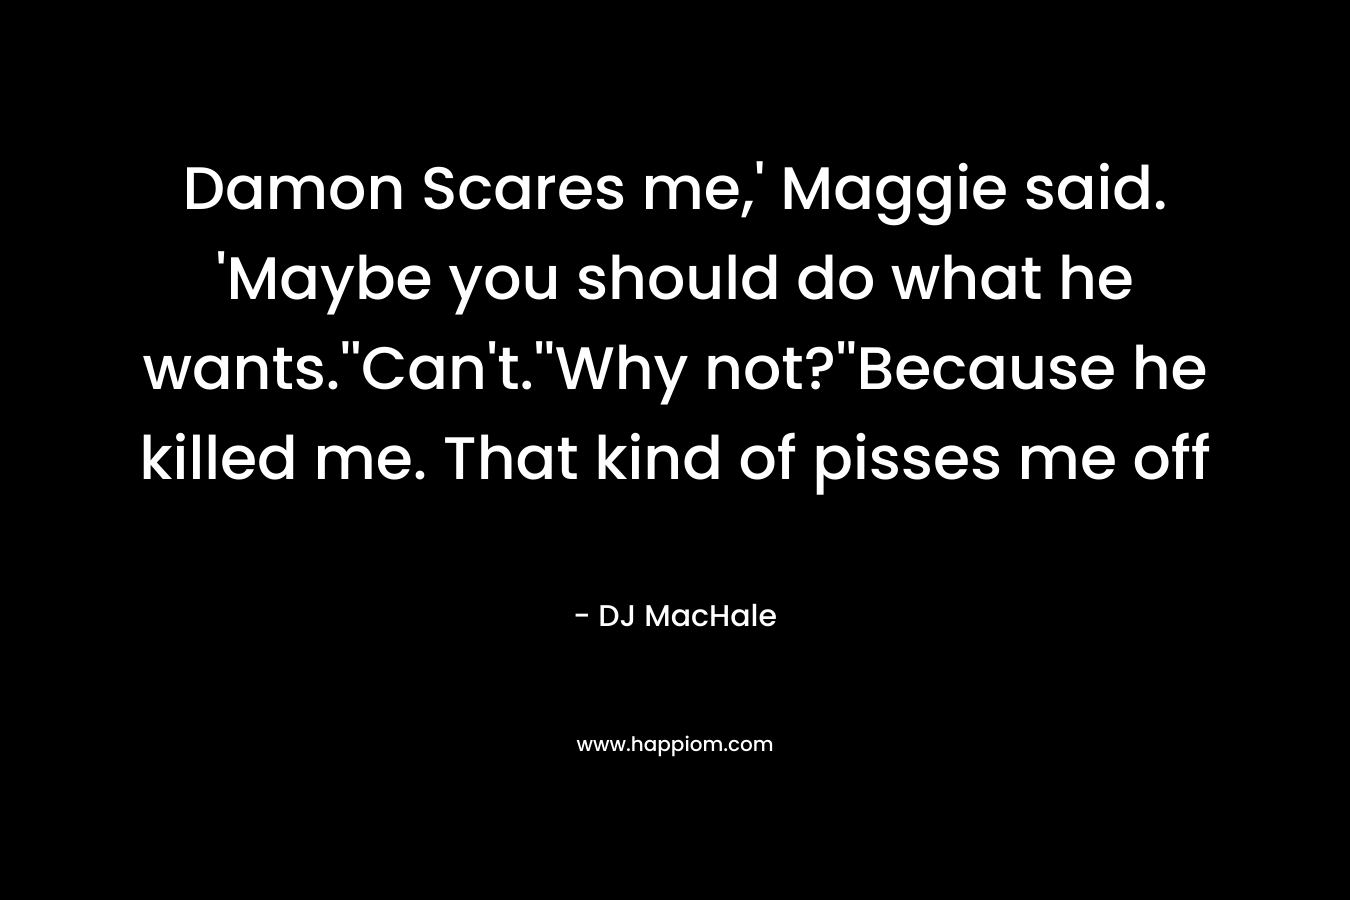 Damon Scares me,’ Maggie said. ‘Maybe you should do what he wants.”Can’t.”Why not?”Because he killed me. That kind of pisses me off – DJ MacHale